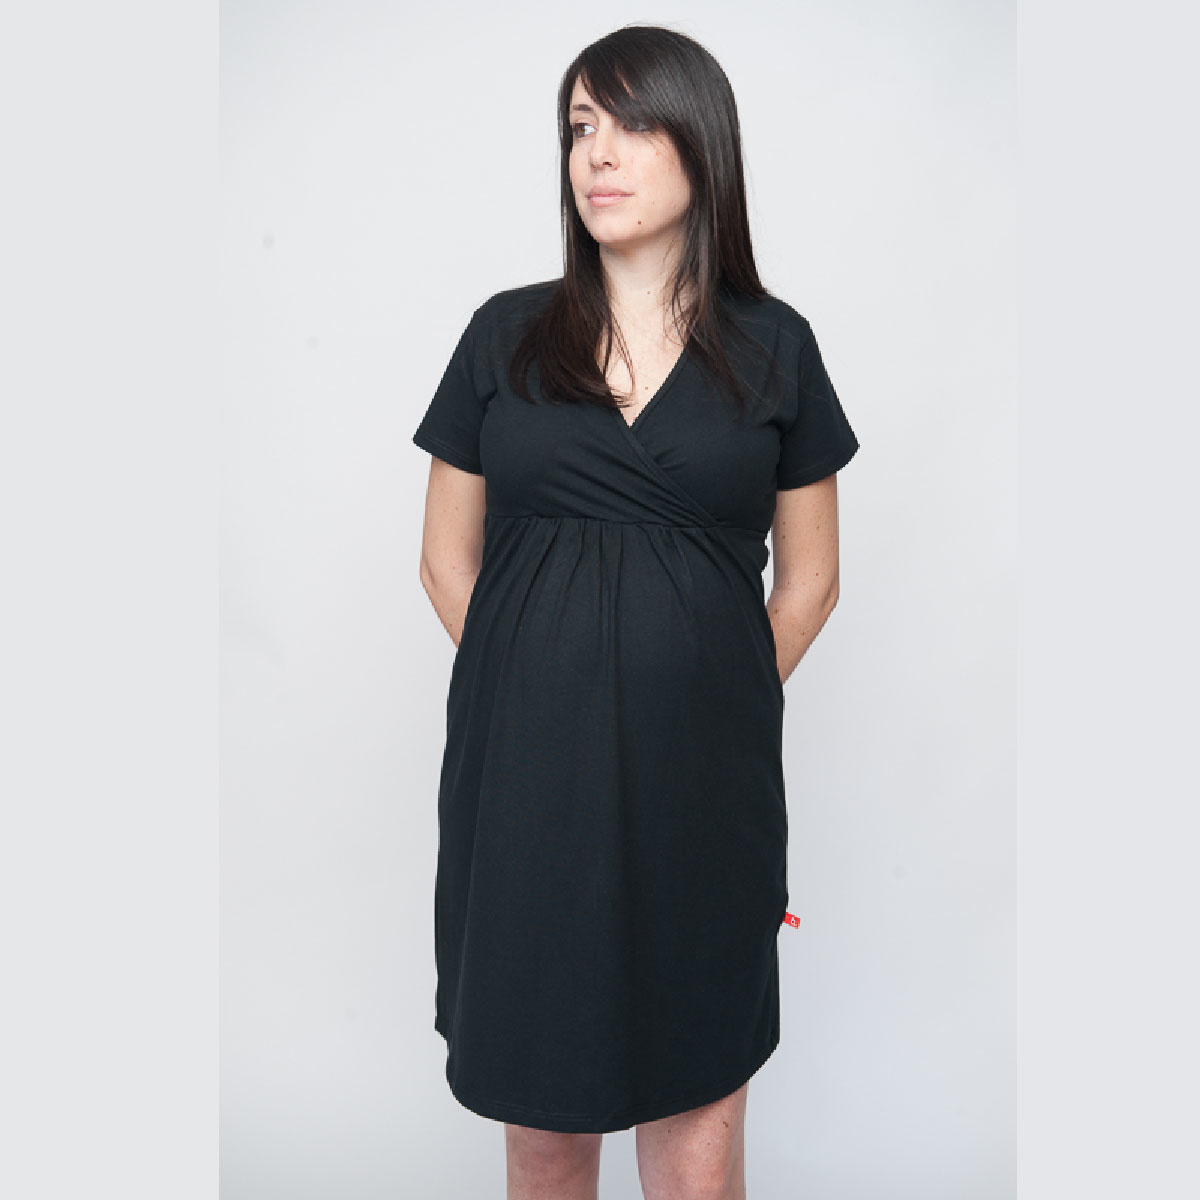 Maternity nightgown from organic cotton